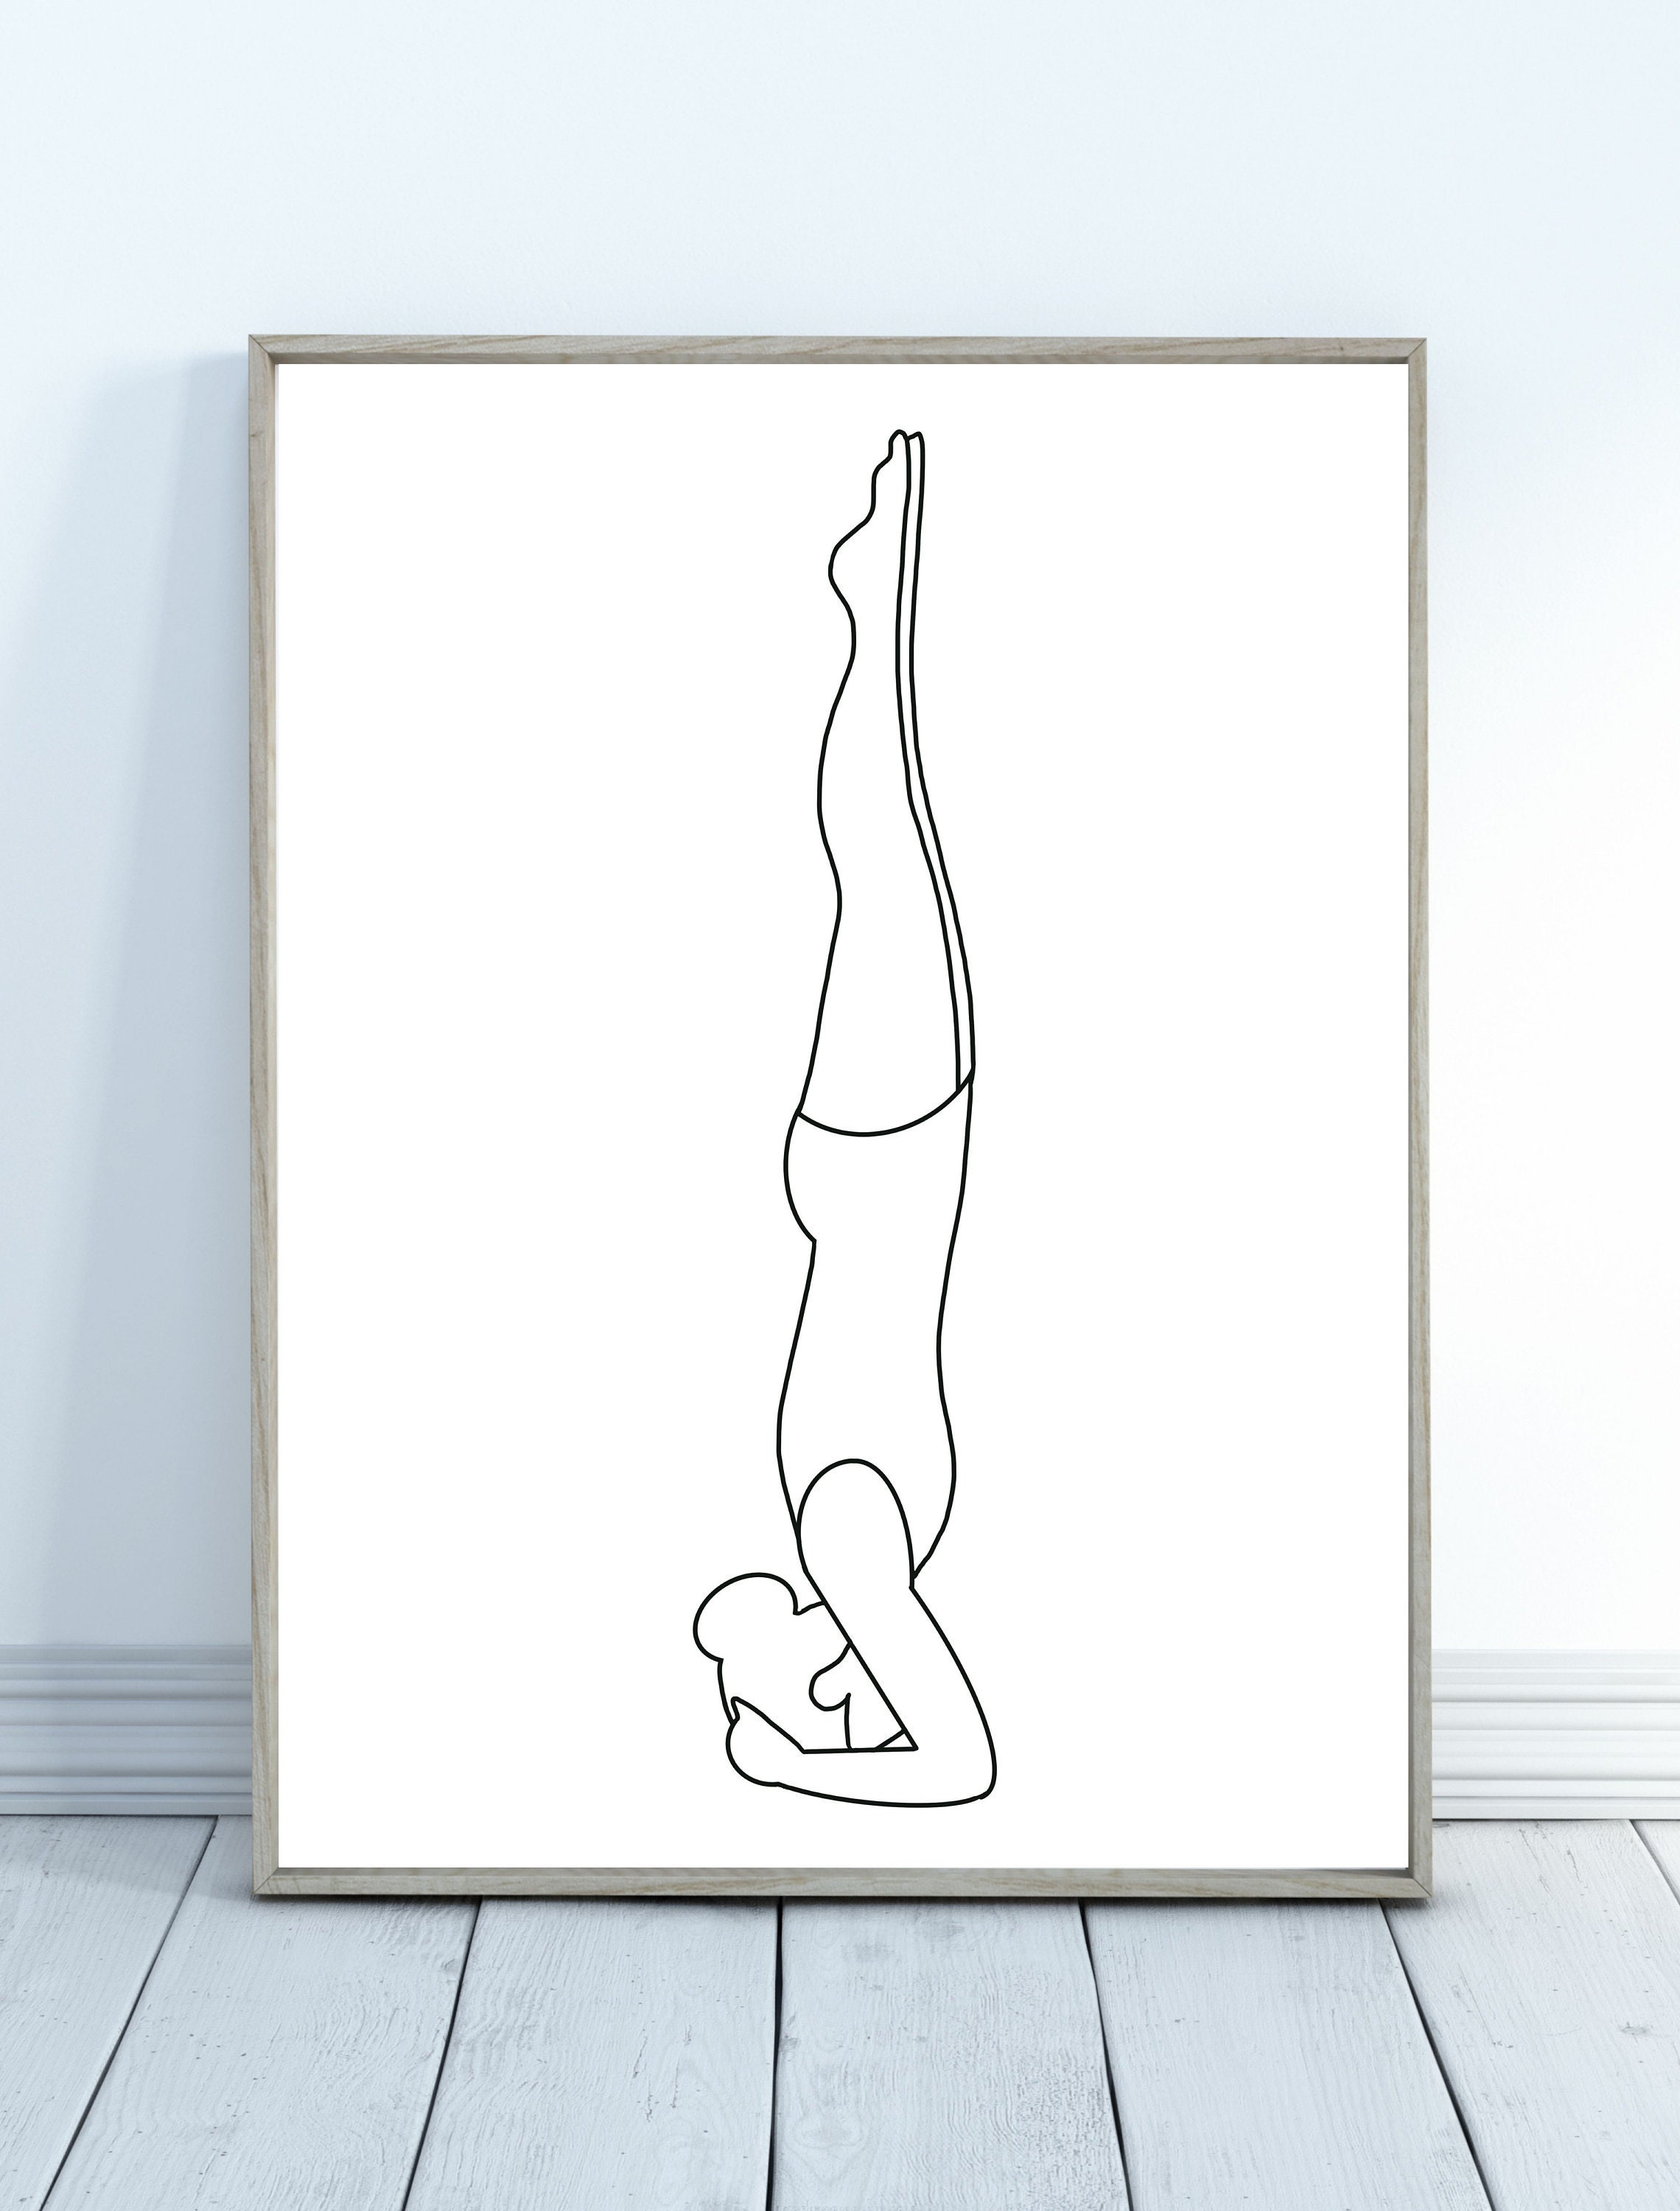 Yoga Poses White Transparent, Abstract Line Drawing Yoga Pose With One Leg  Support, Wing Drawing, Yoga Drawing, Leg Drawing PNG Image For Free Download